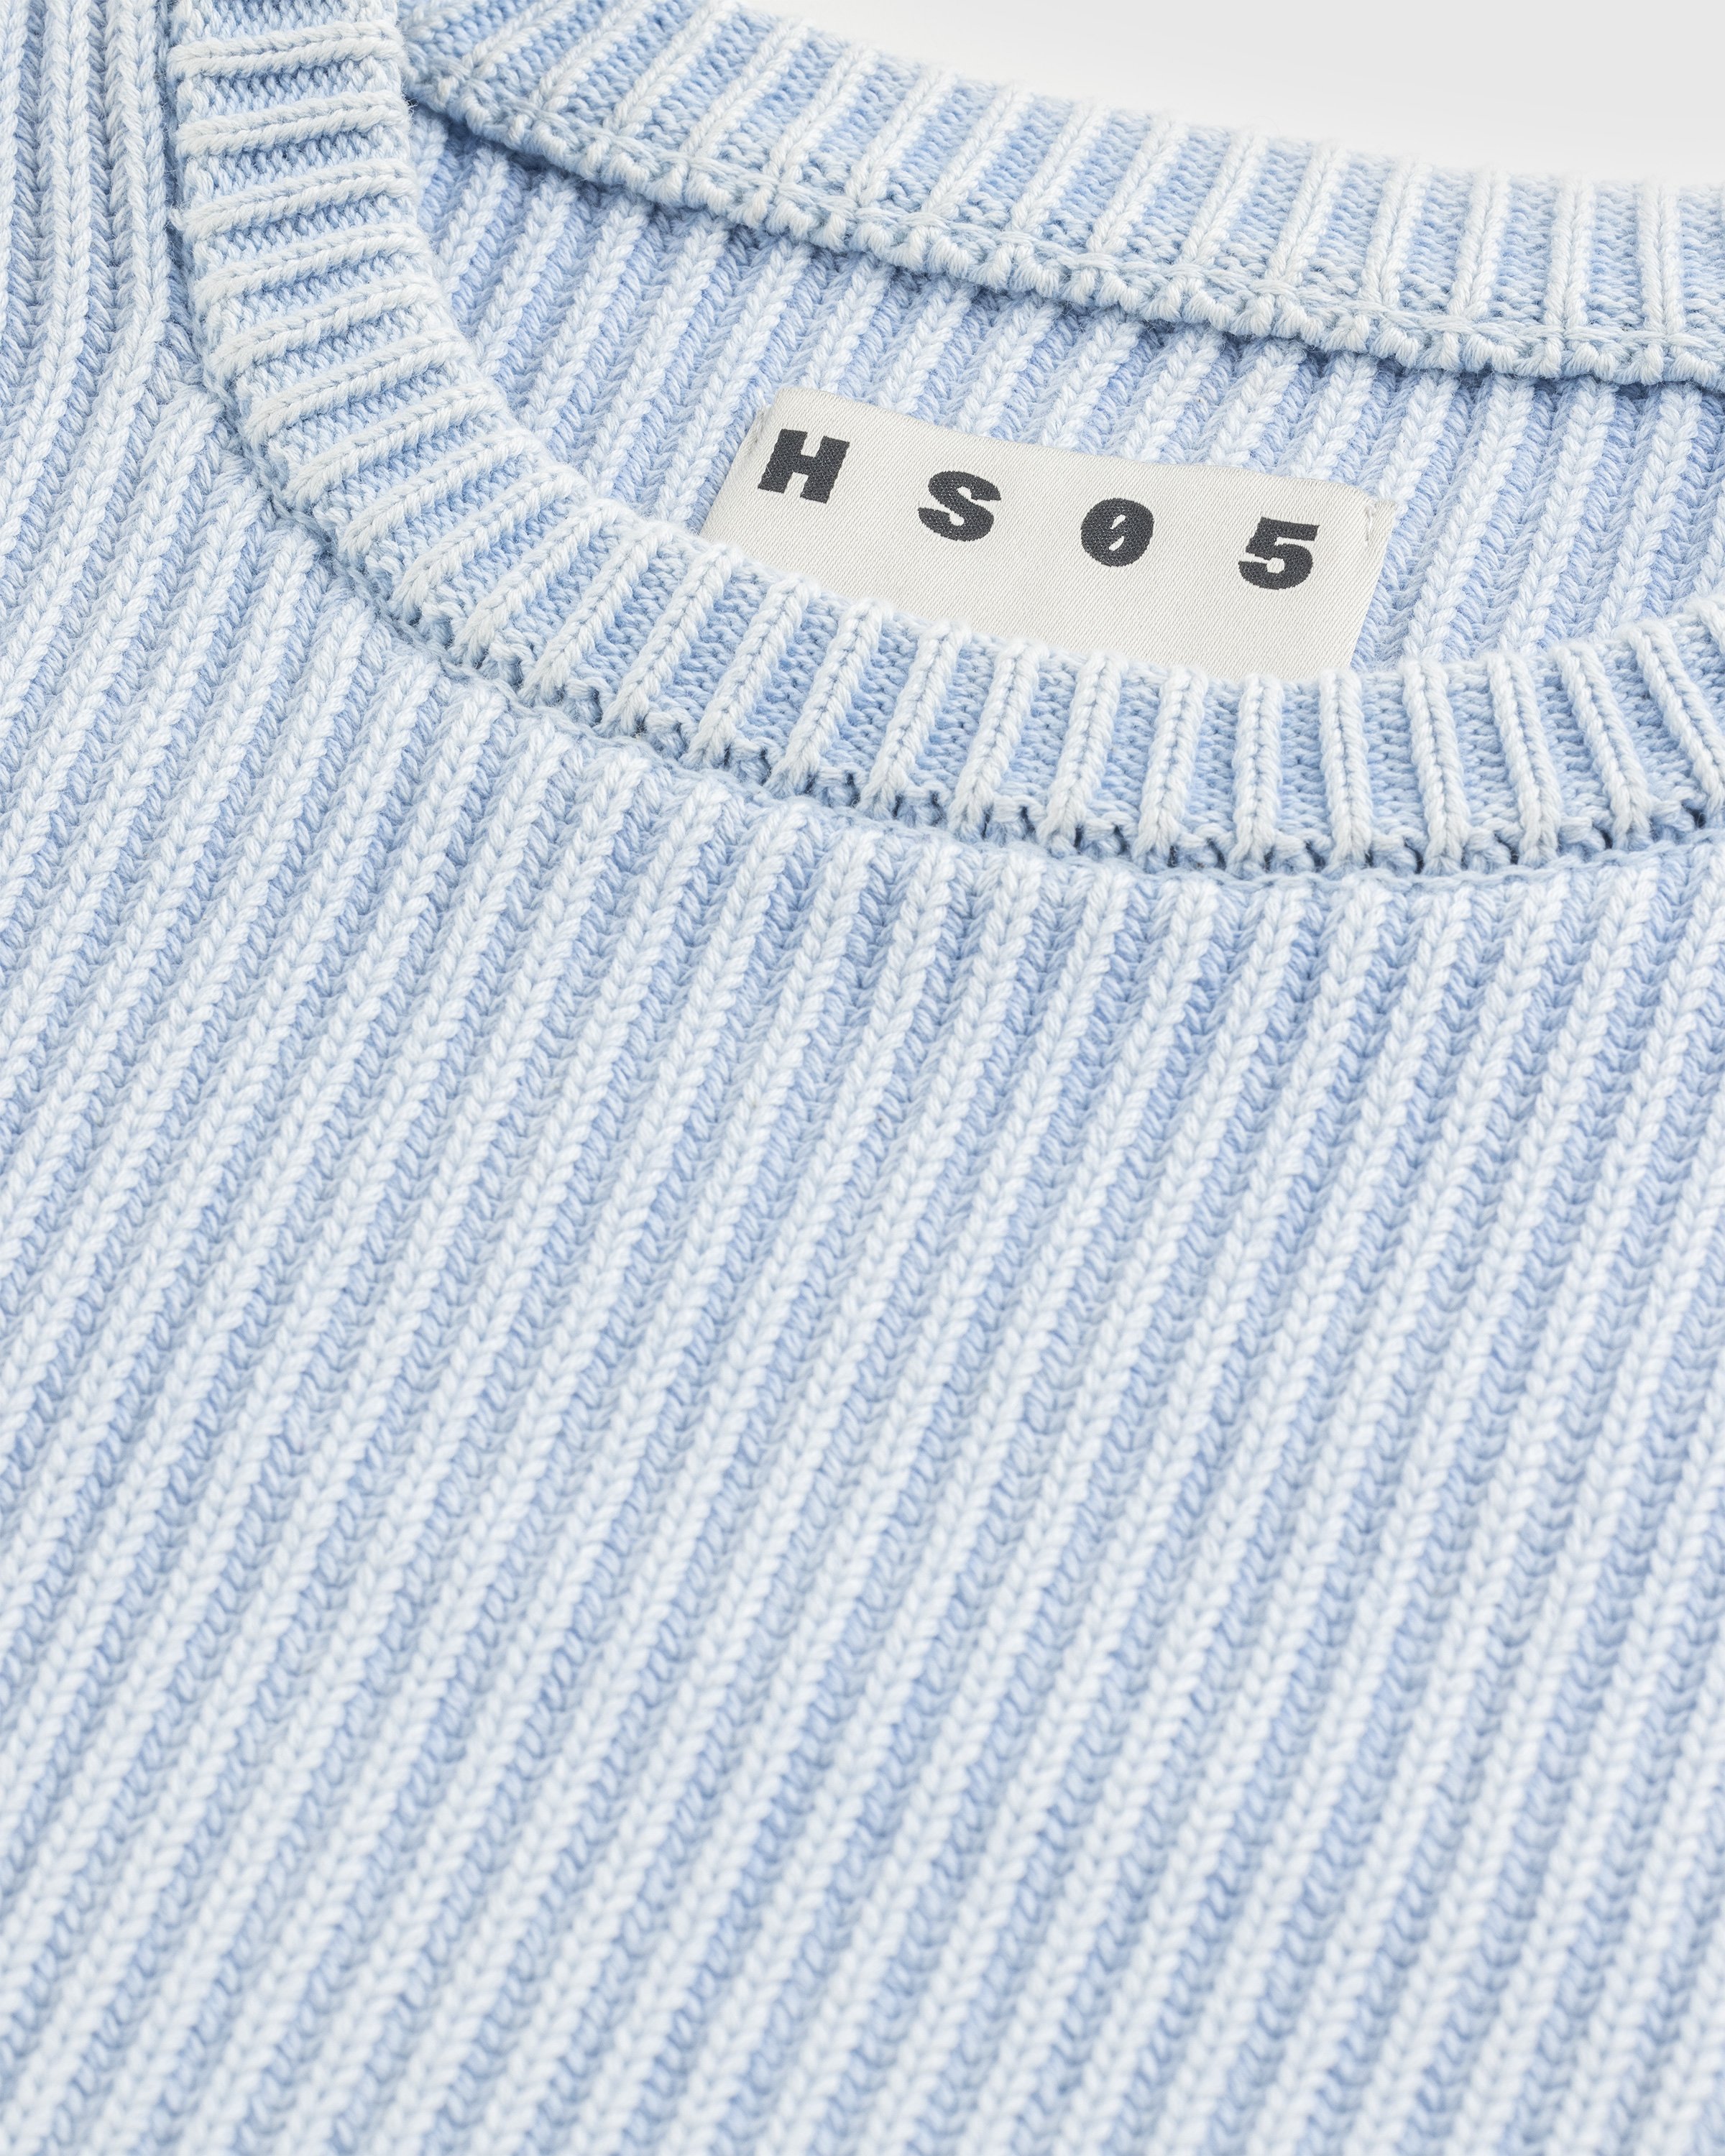 Highsnobiety HS05 - Pigment Dyed Sweater Light Blue - Clothing - Light Blue - Image 8